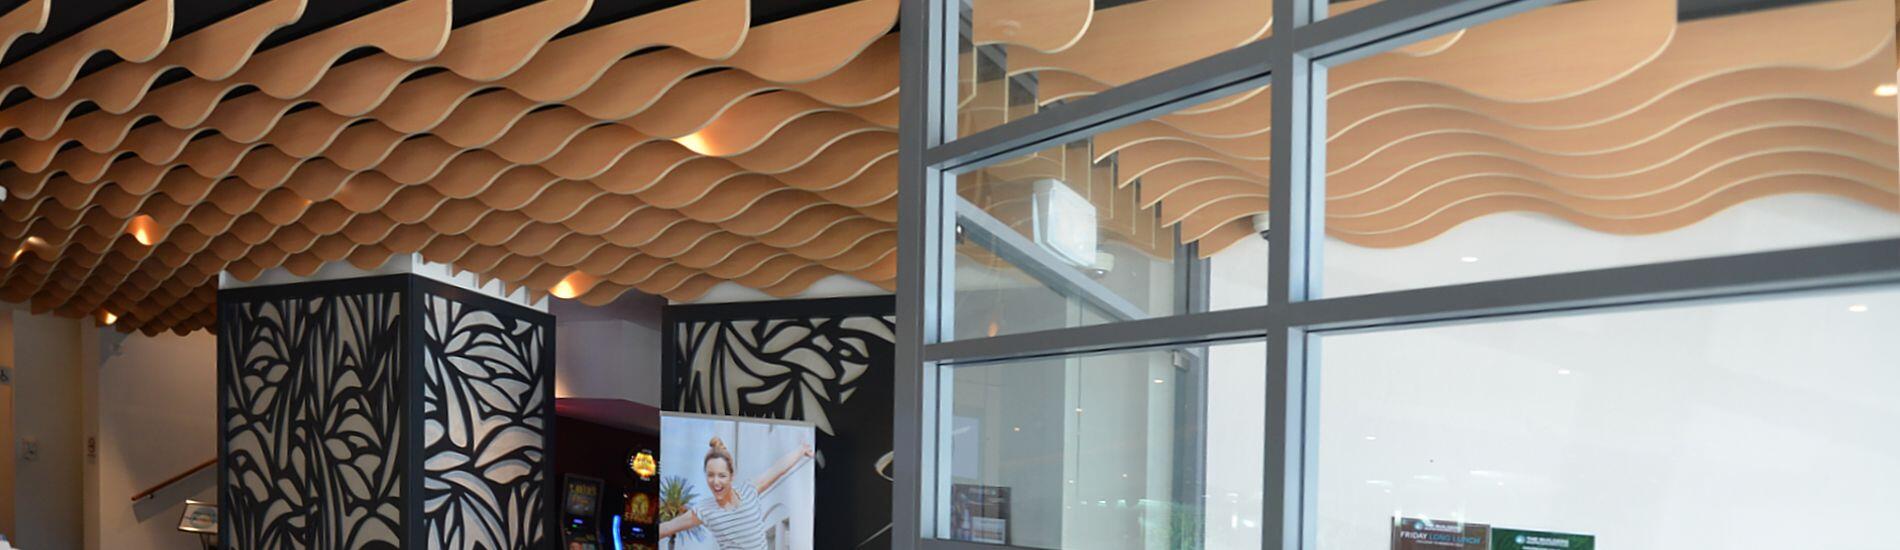 Timber WAVE BLADES Create Ripple Effect Ceiling Flowing Through Club Entry